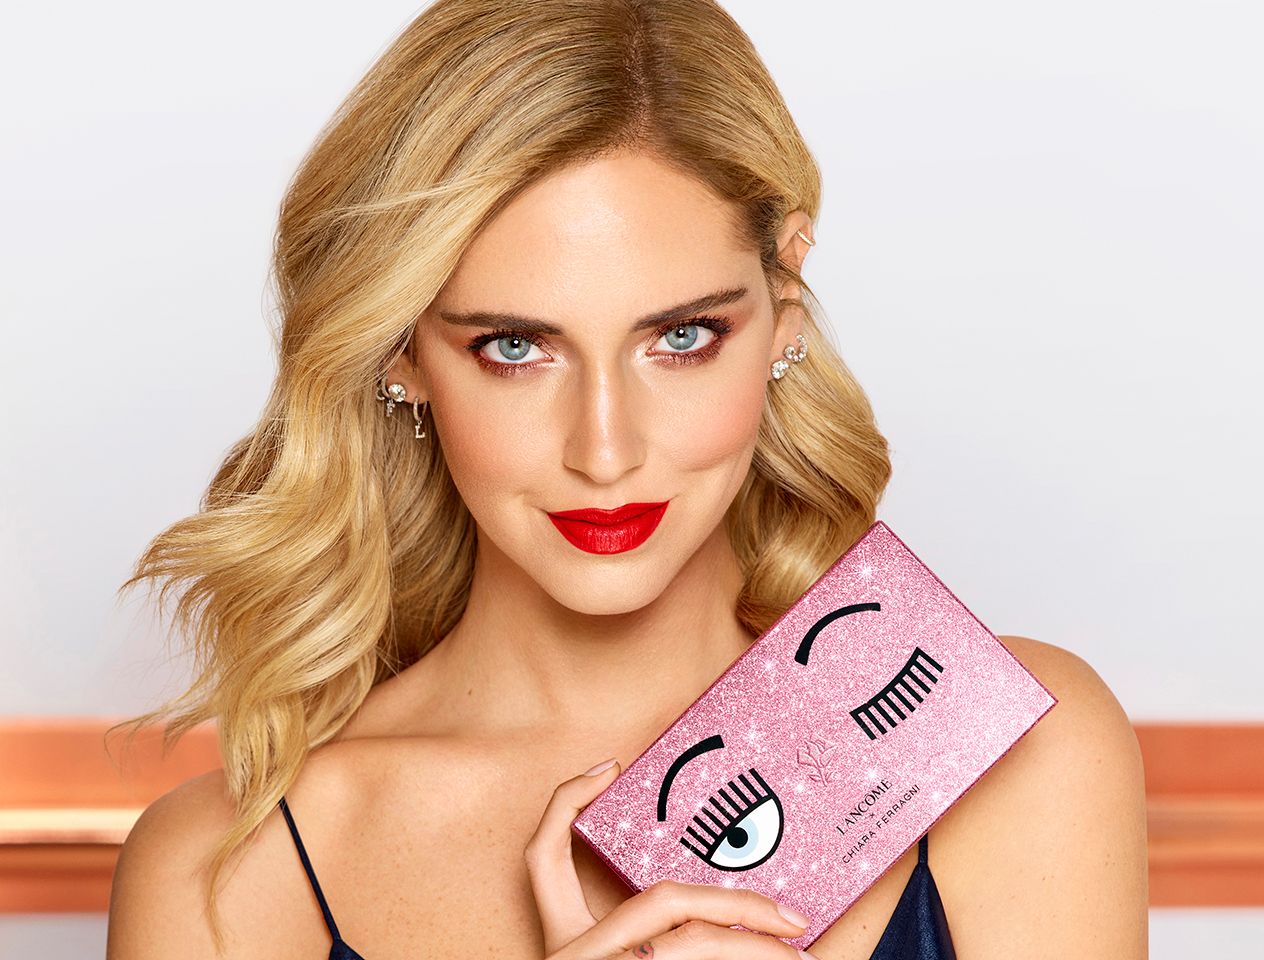 The secrets to looking #instagood: Chiara Ferragni reveals her beauty tips